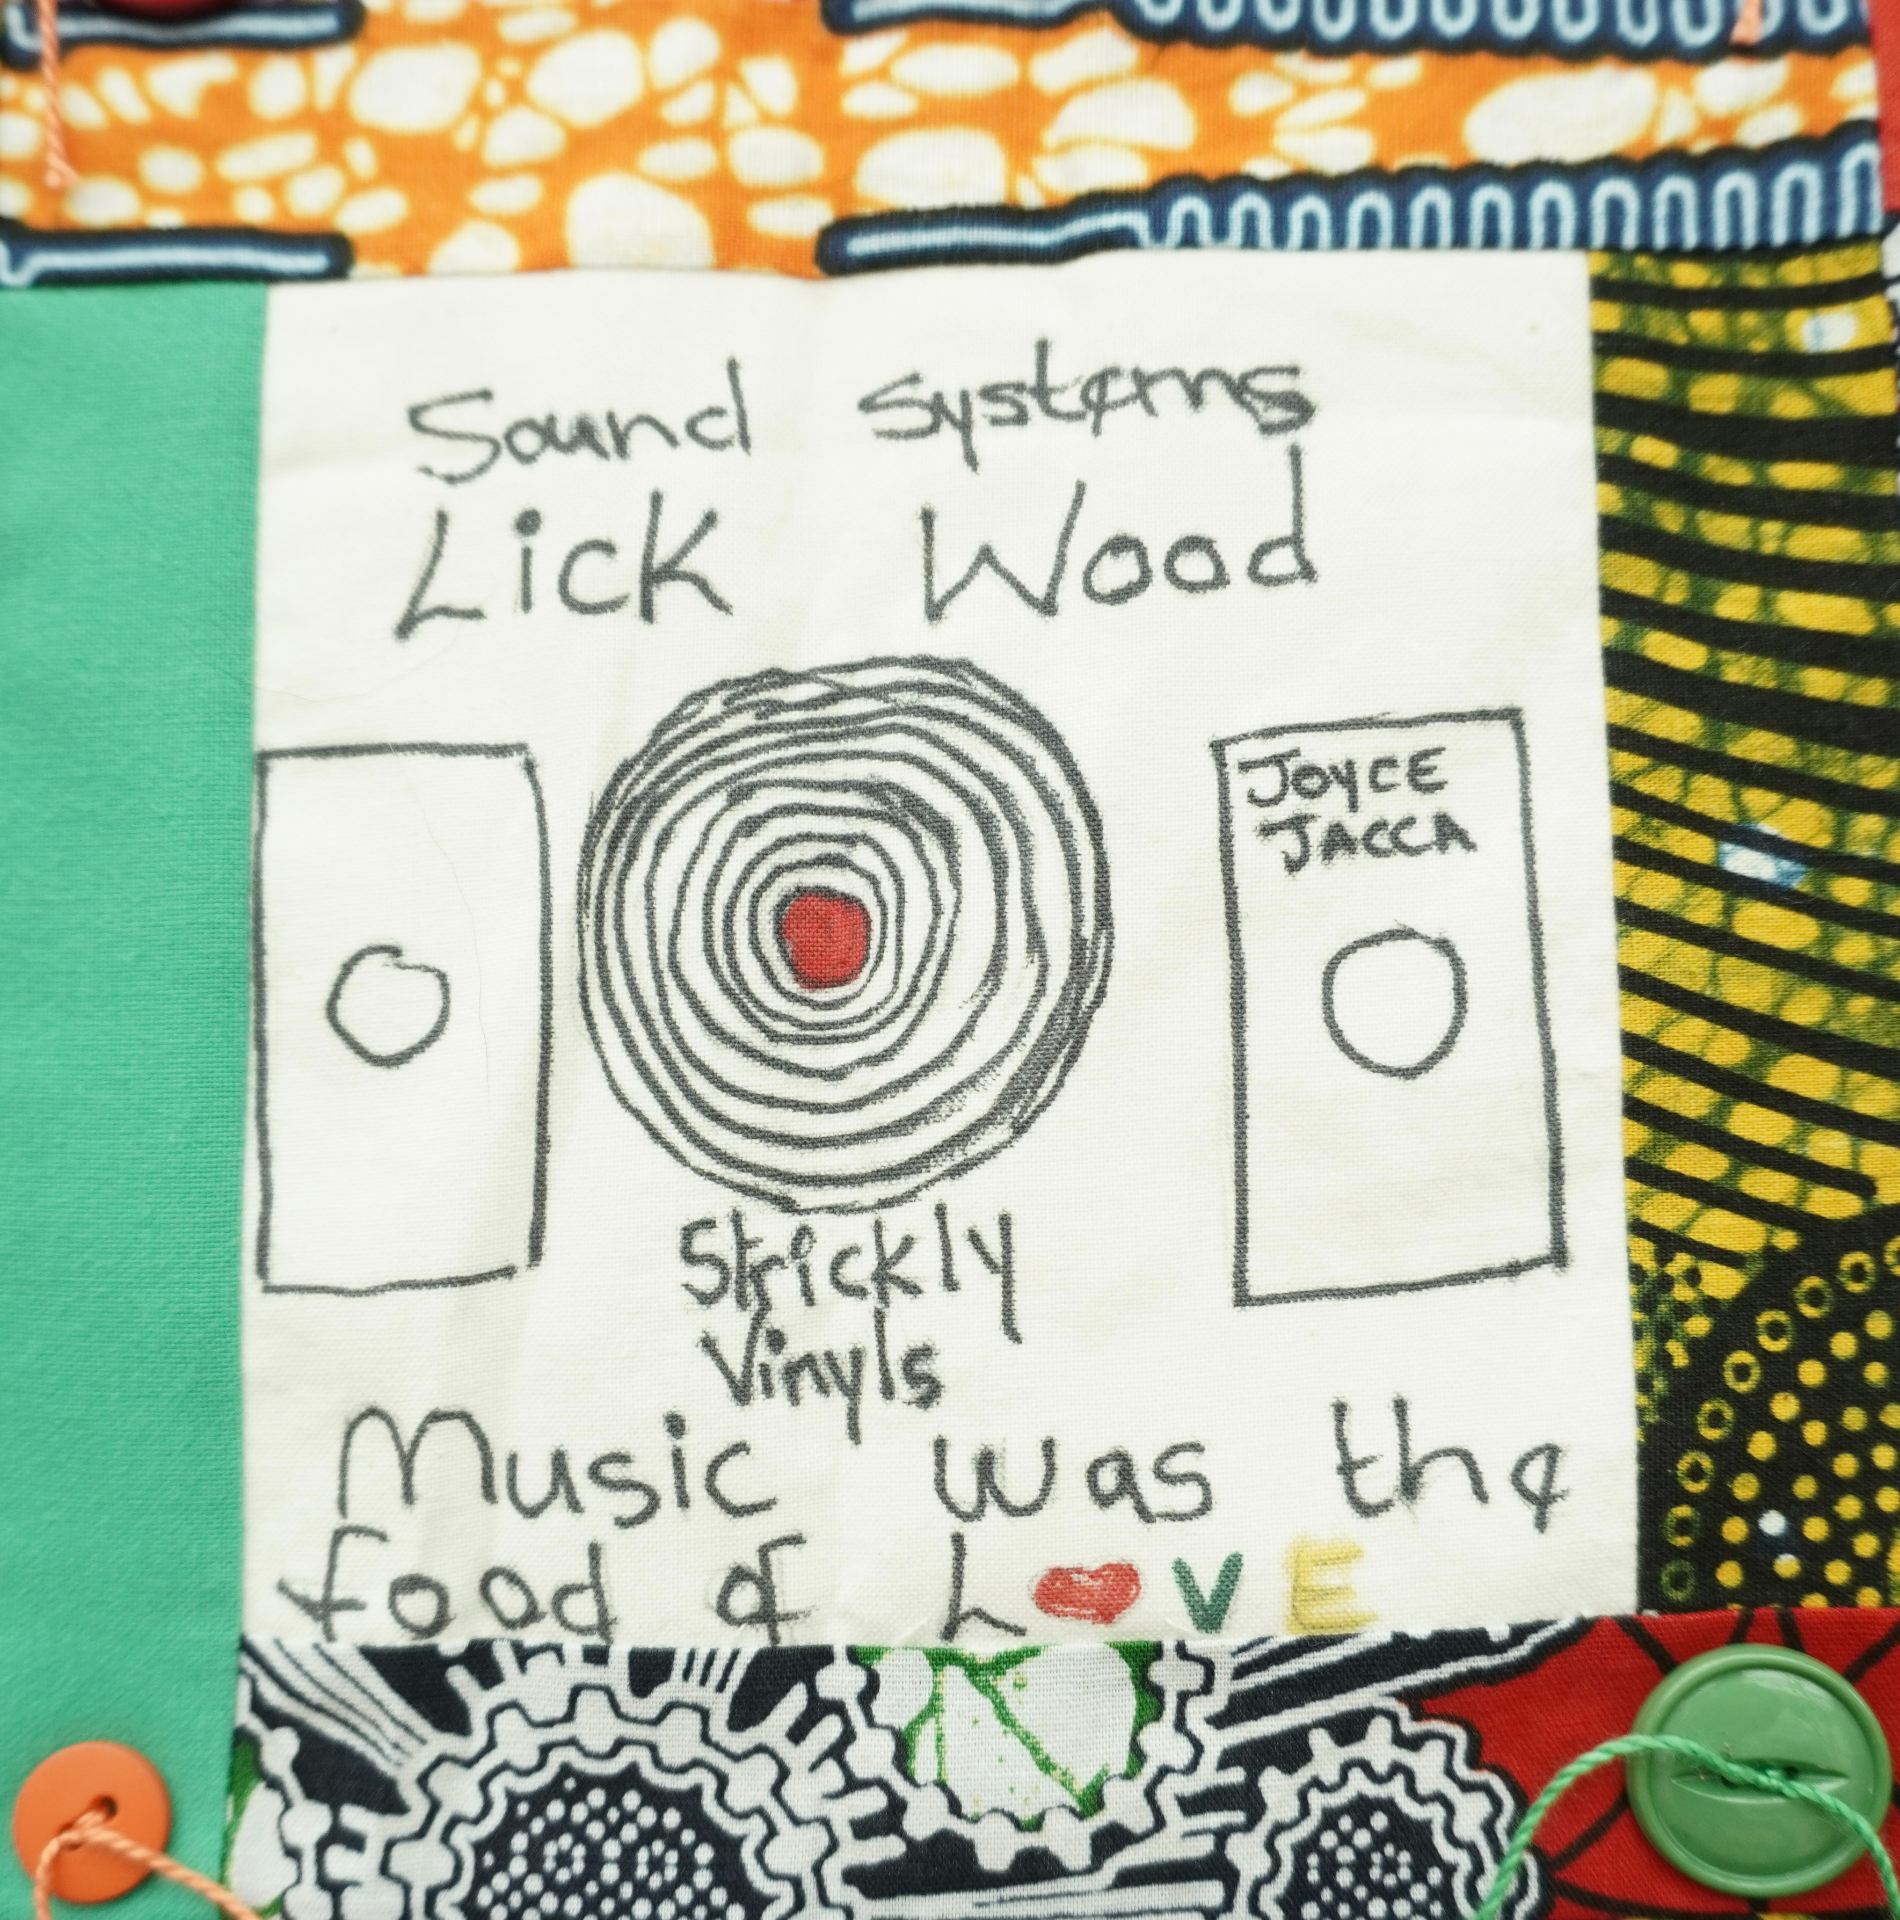 Commemorative quilt. Text reads, 'Sound systems Lick Wood, Joyce Jacca, Strictly Vinyls, Music was the food of love'